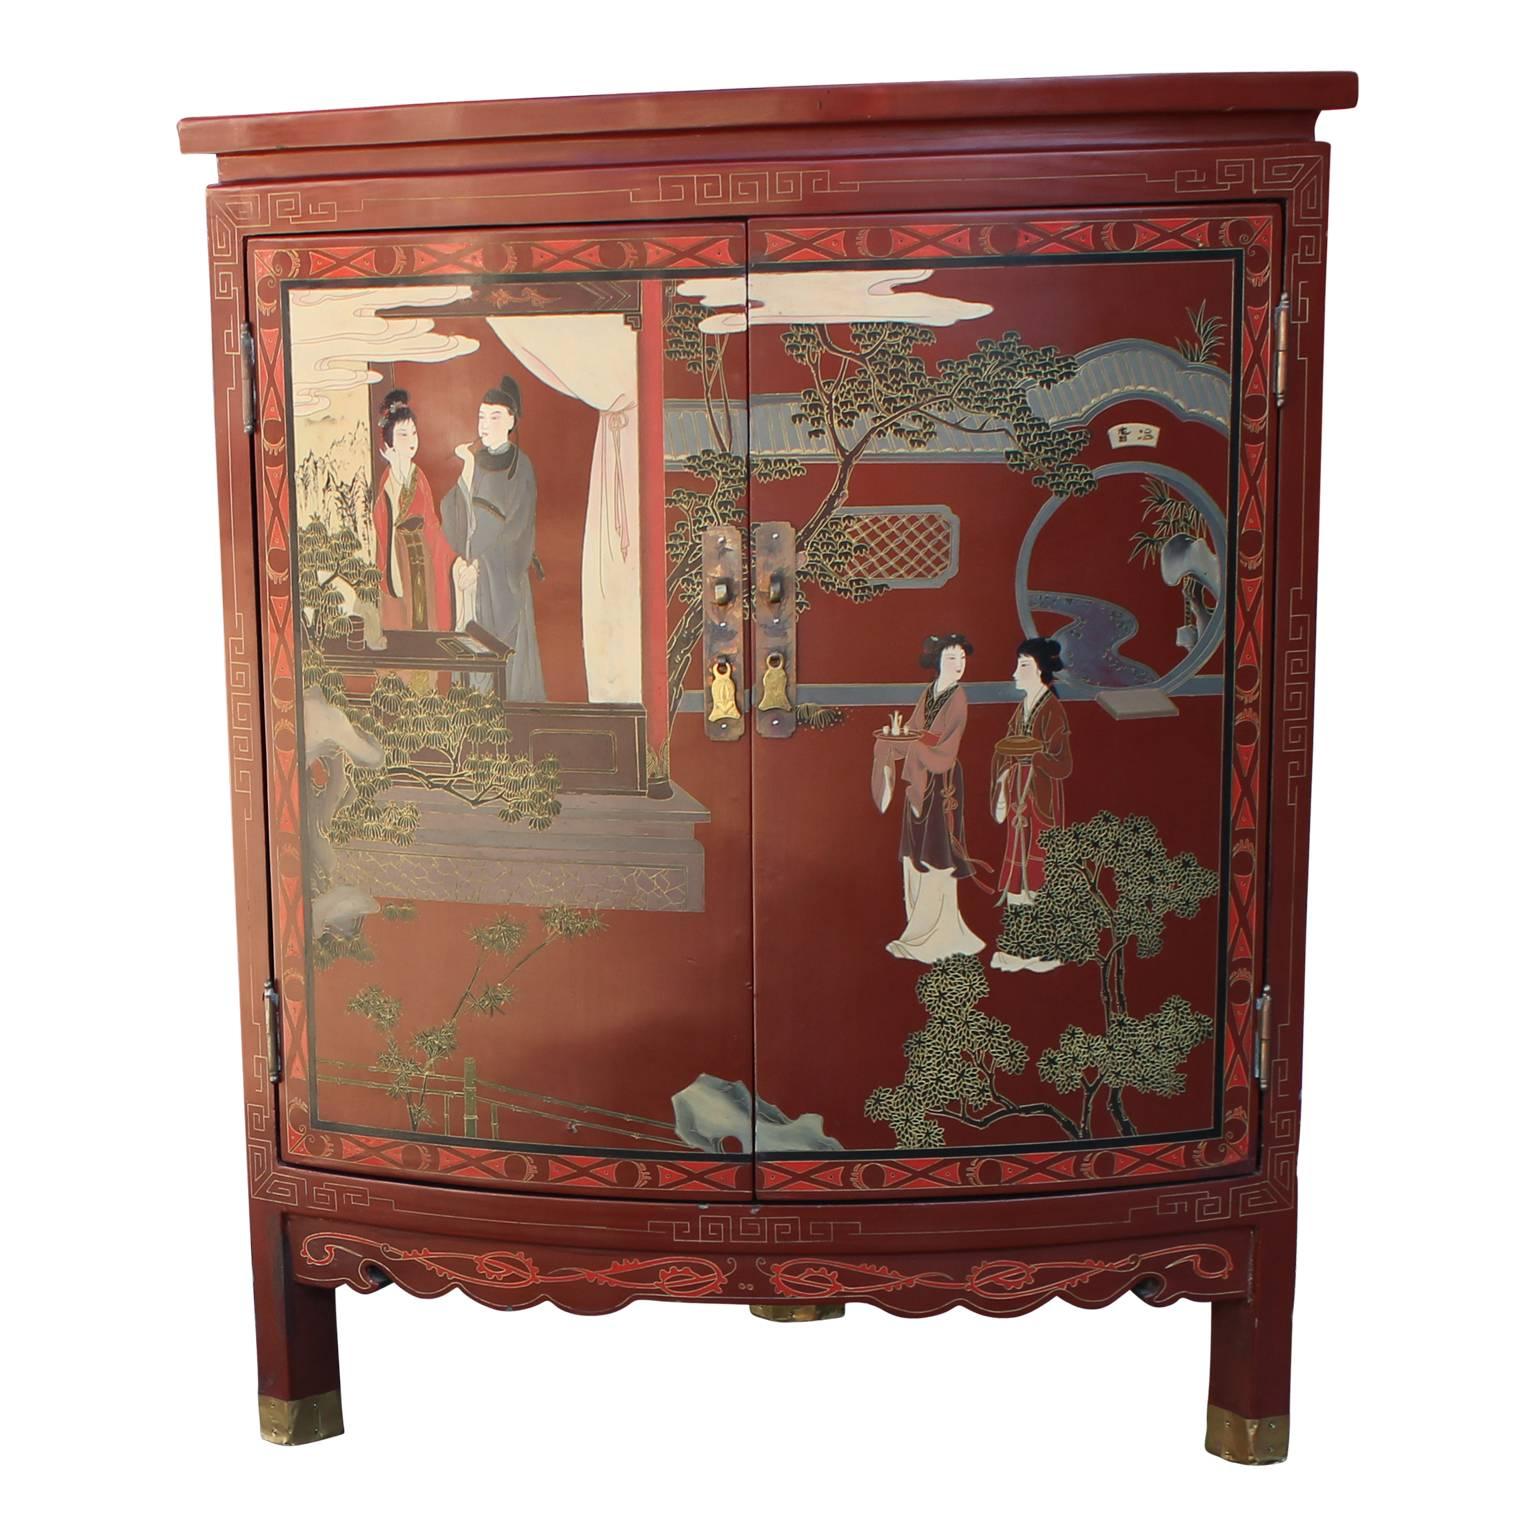 Gorgeous Chinese chinoiserie corner cabinet with painted detailing of daily life. Unique addition to any space! Excellent quality and construction. 